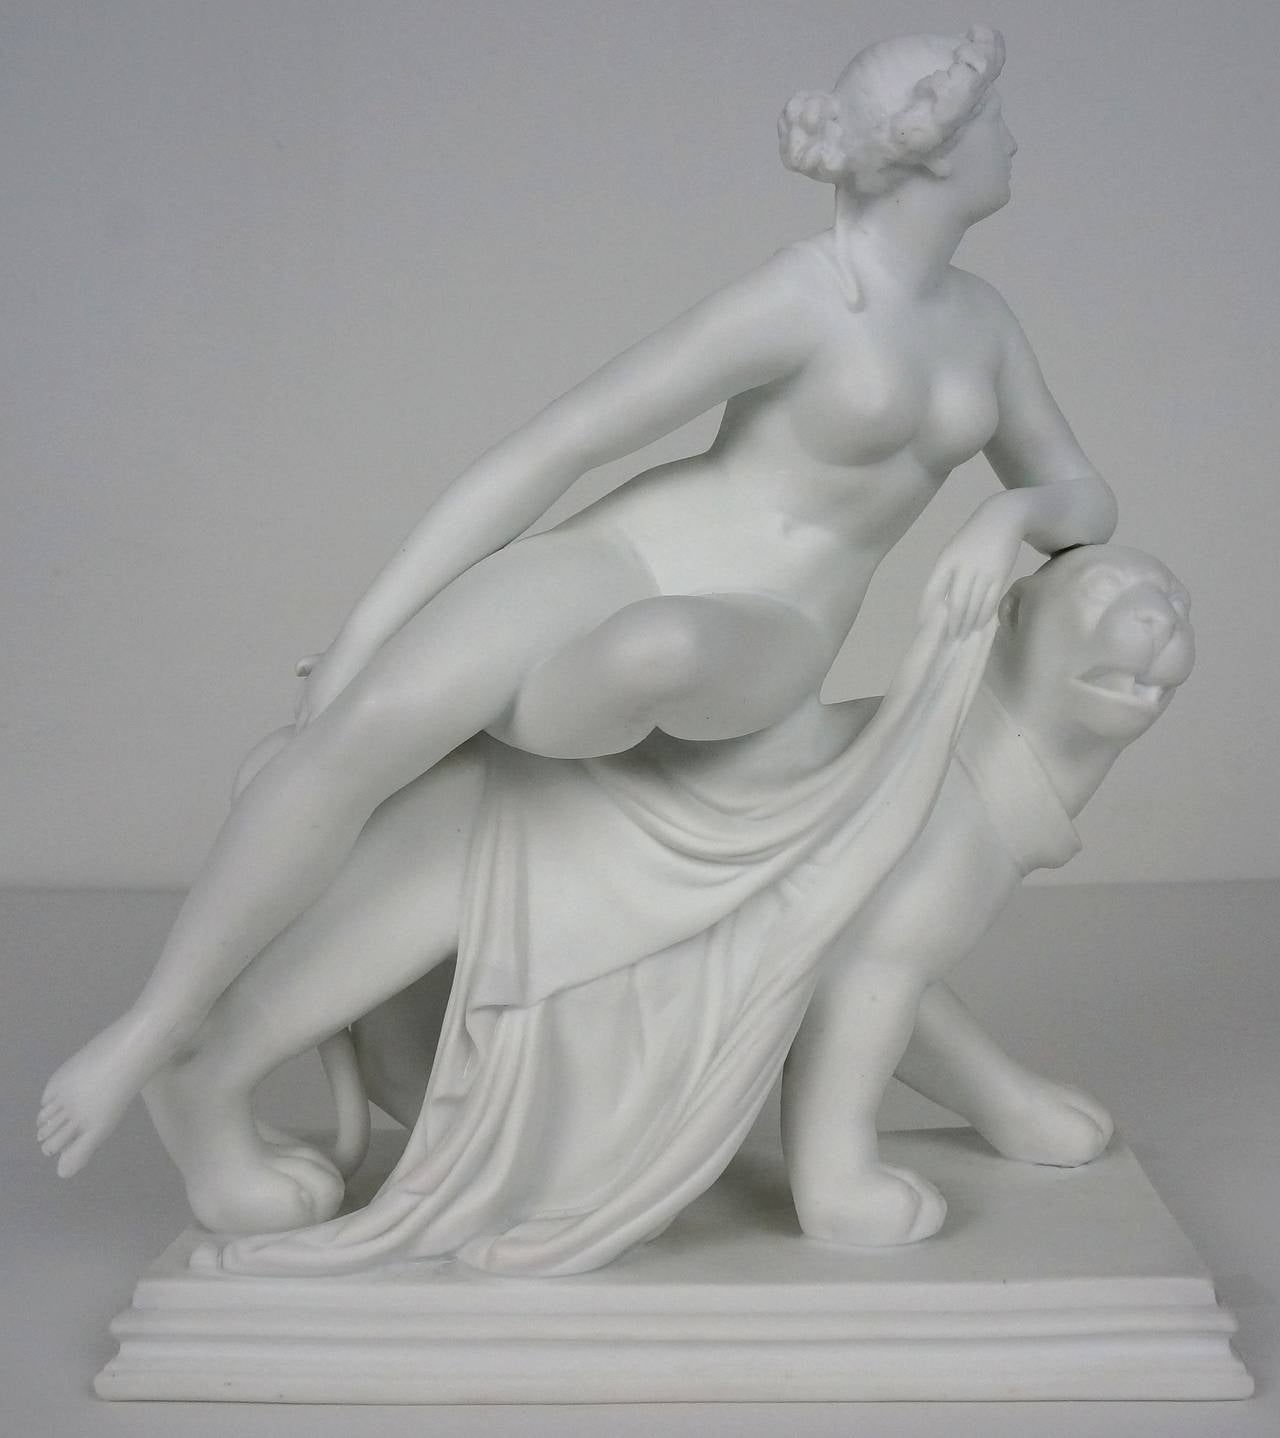 Minton Group 'ARIADNE on a PANTHER'
A Parian-ware figure of Ariadne reclining nude on the back of a stylized panther, moving towards the right; she wears an acanthus wreath on her head, her left leg tucked beneath her right, holding drapery in her